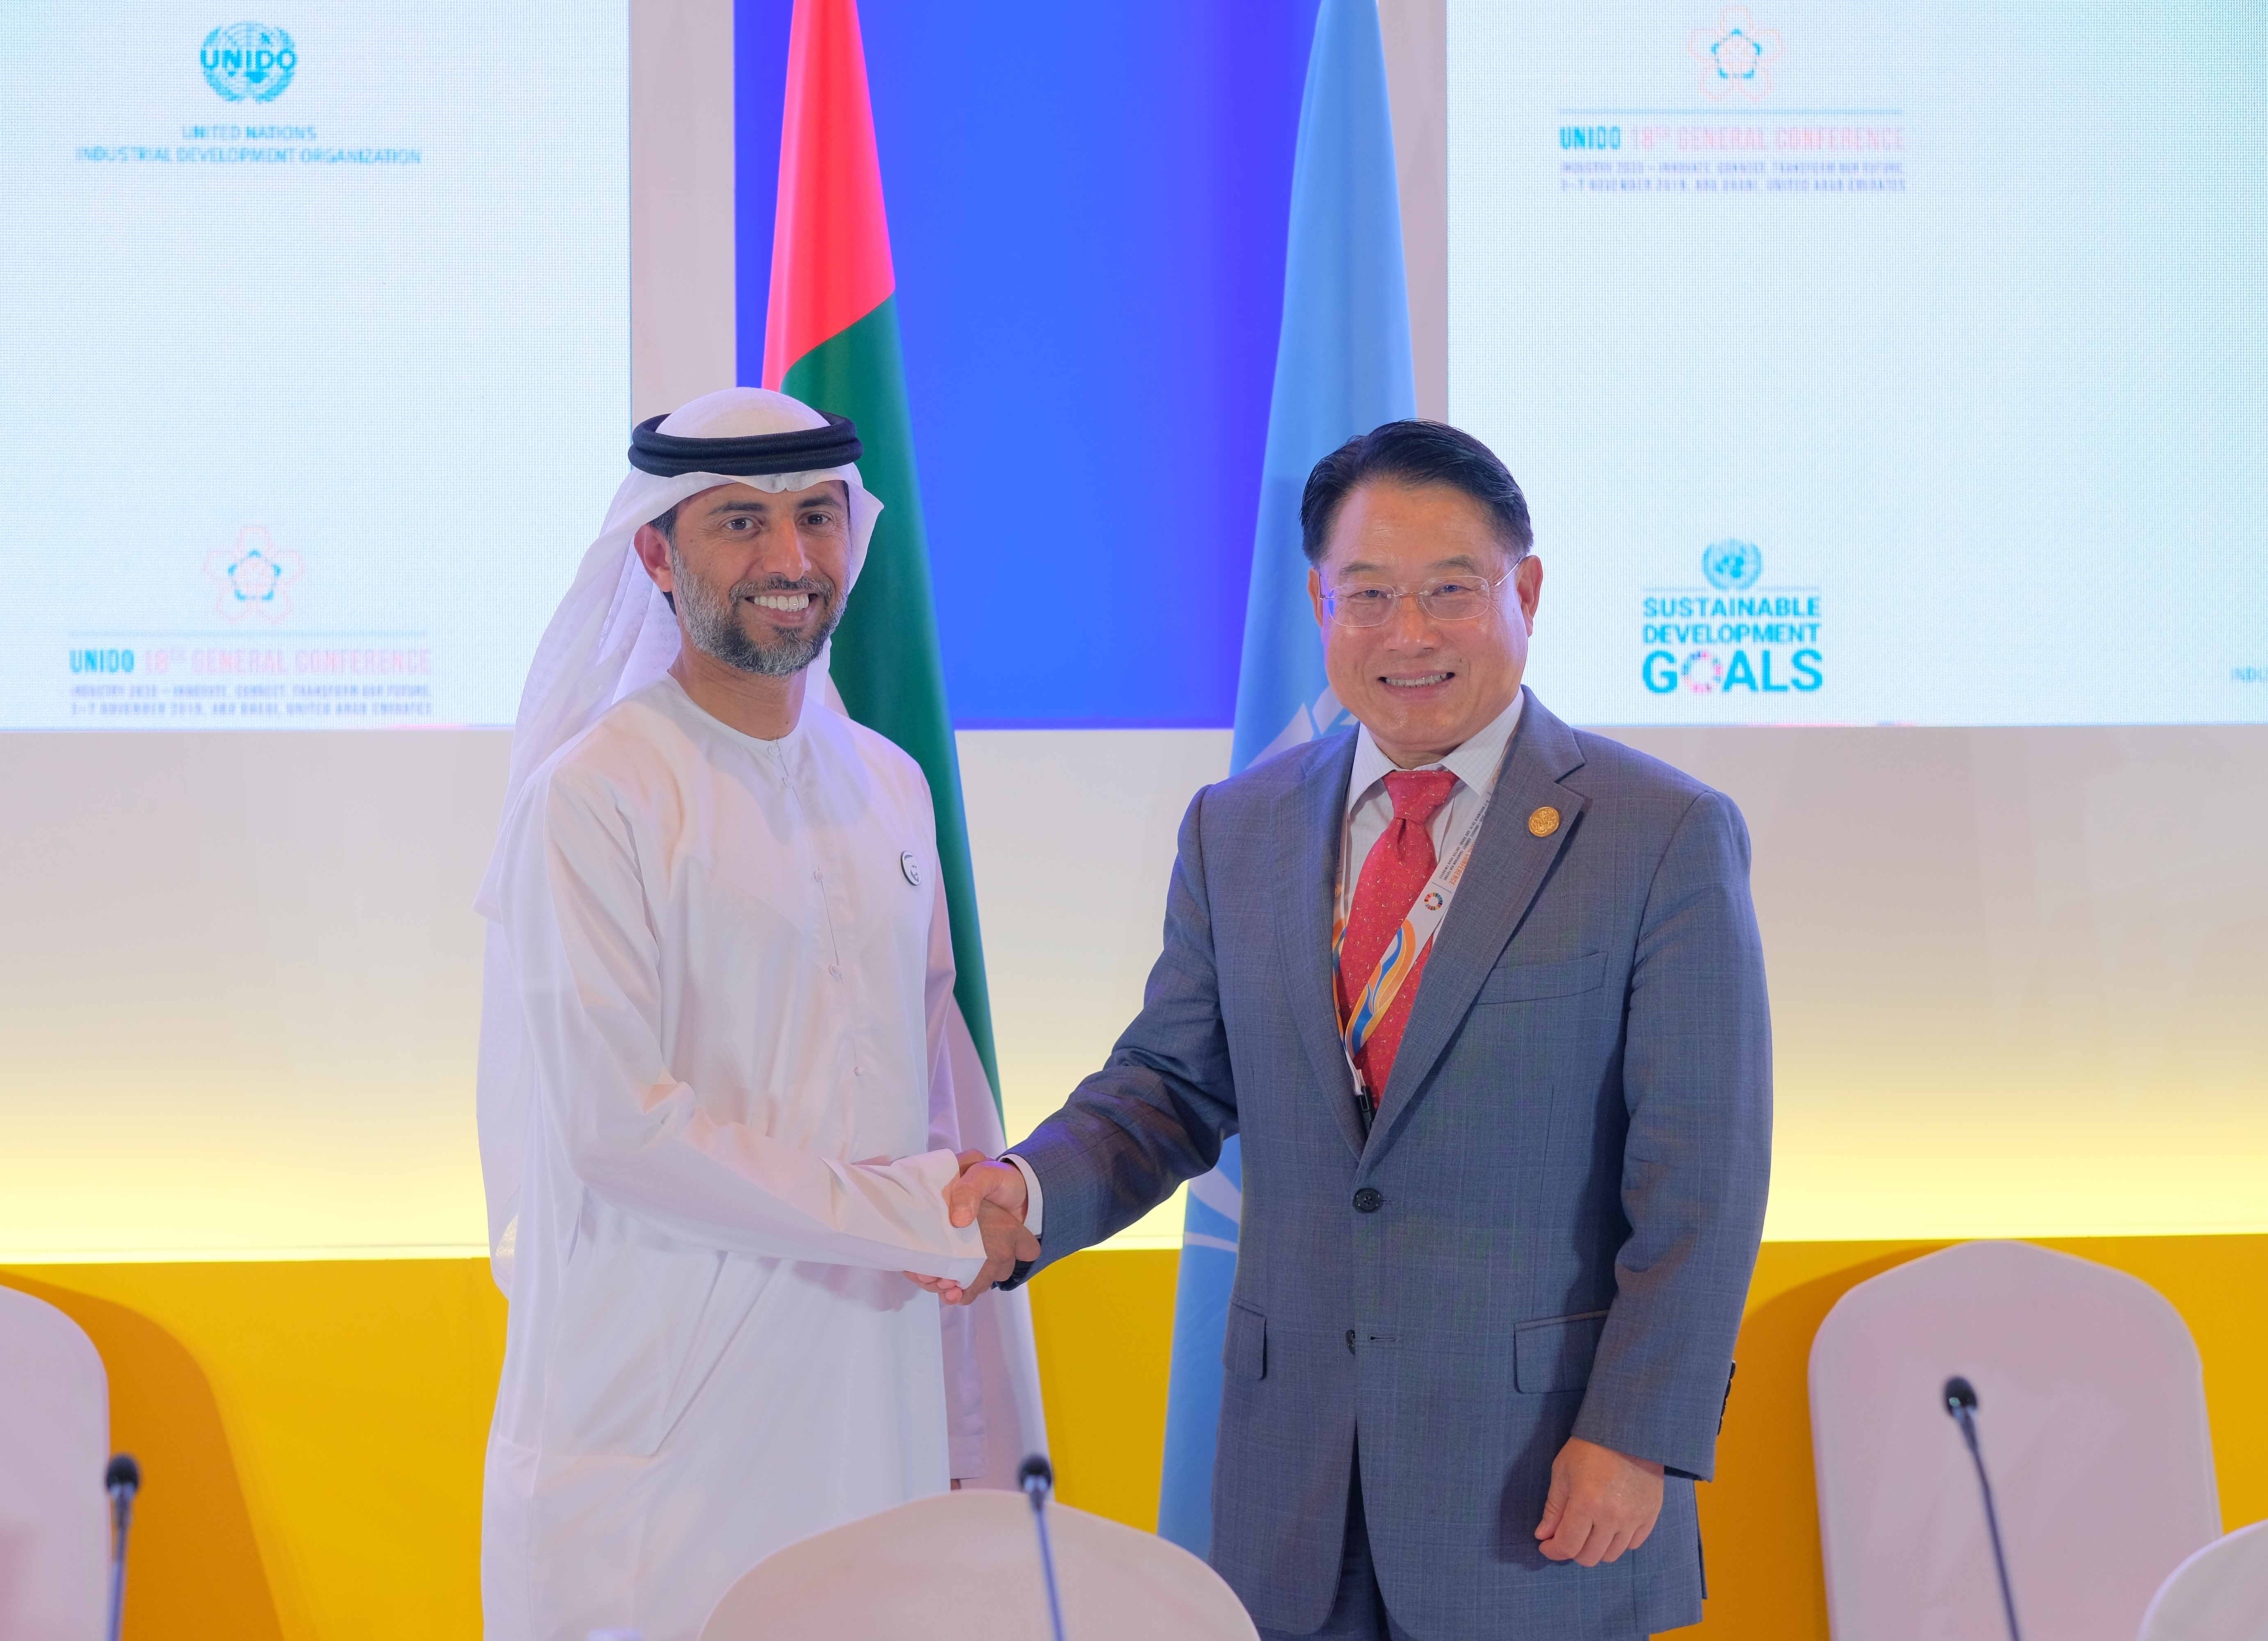 Milestone UNIDO General Conference In Abu Dhabi Draws To A Close After Adopting Historic Abu Dhabi Declaration